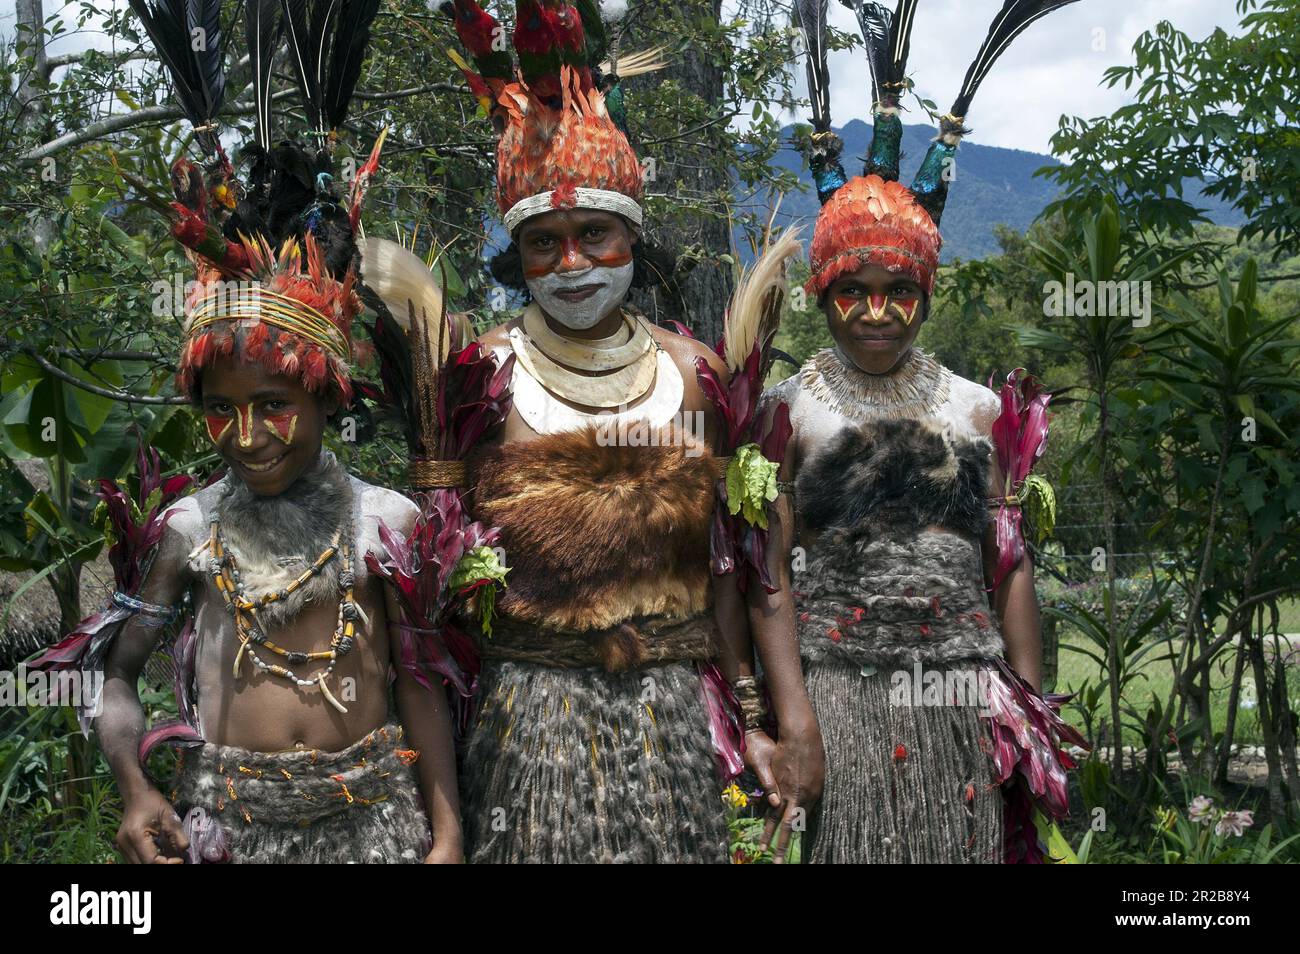 Papua New Guinea; Eastern Highlands; Goroka; Papuan girls in traditional ceremonial costumes made of skins, grasses, colored feathers and shells Stock Photo